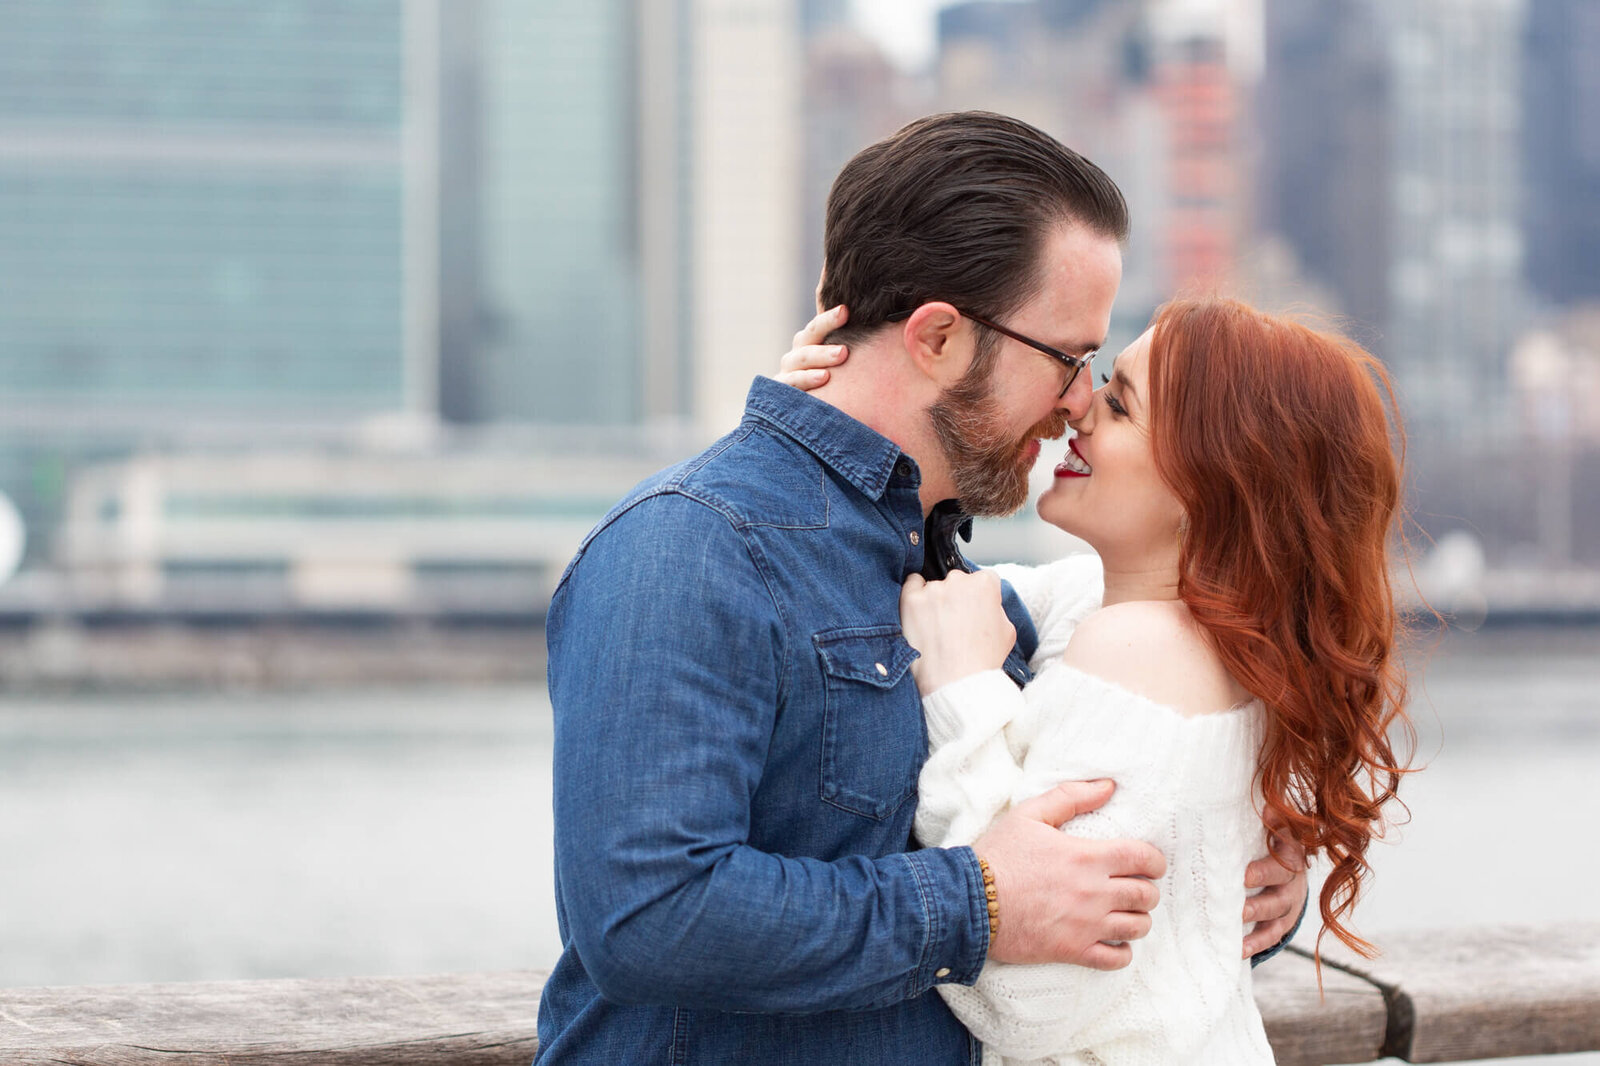 nyc-engagement-session-long-island-city-queens-skyline-red-hair-1